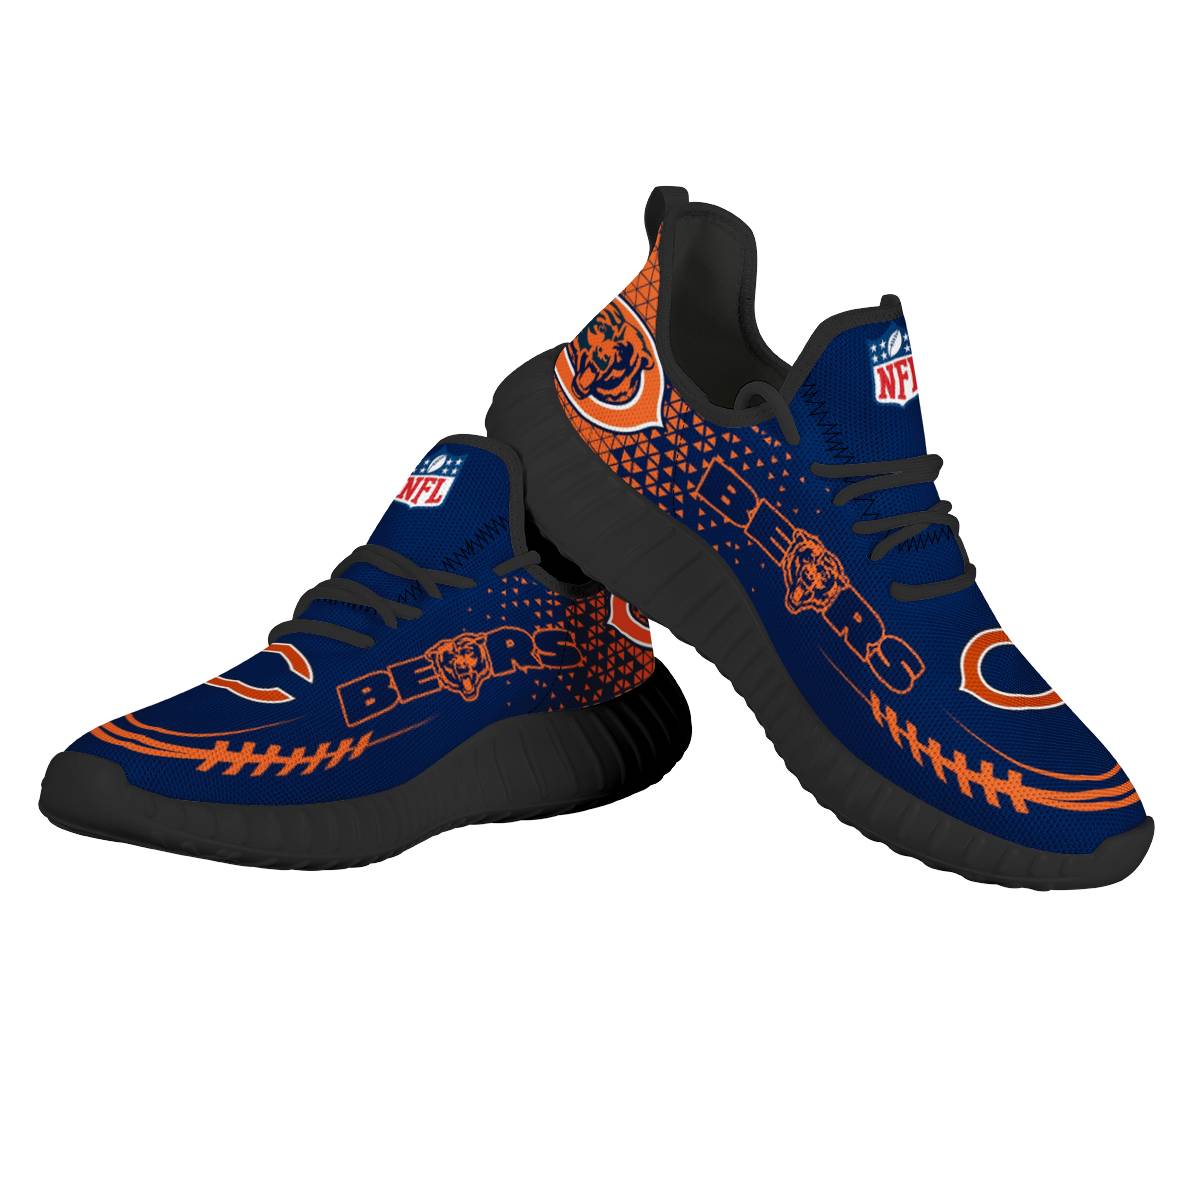 Men's Chicago Bears Mesh Knit Sneakers/Shoes 010